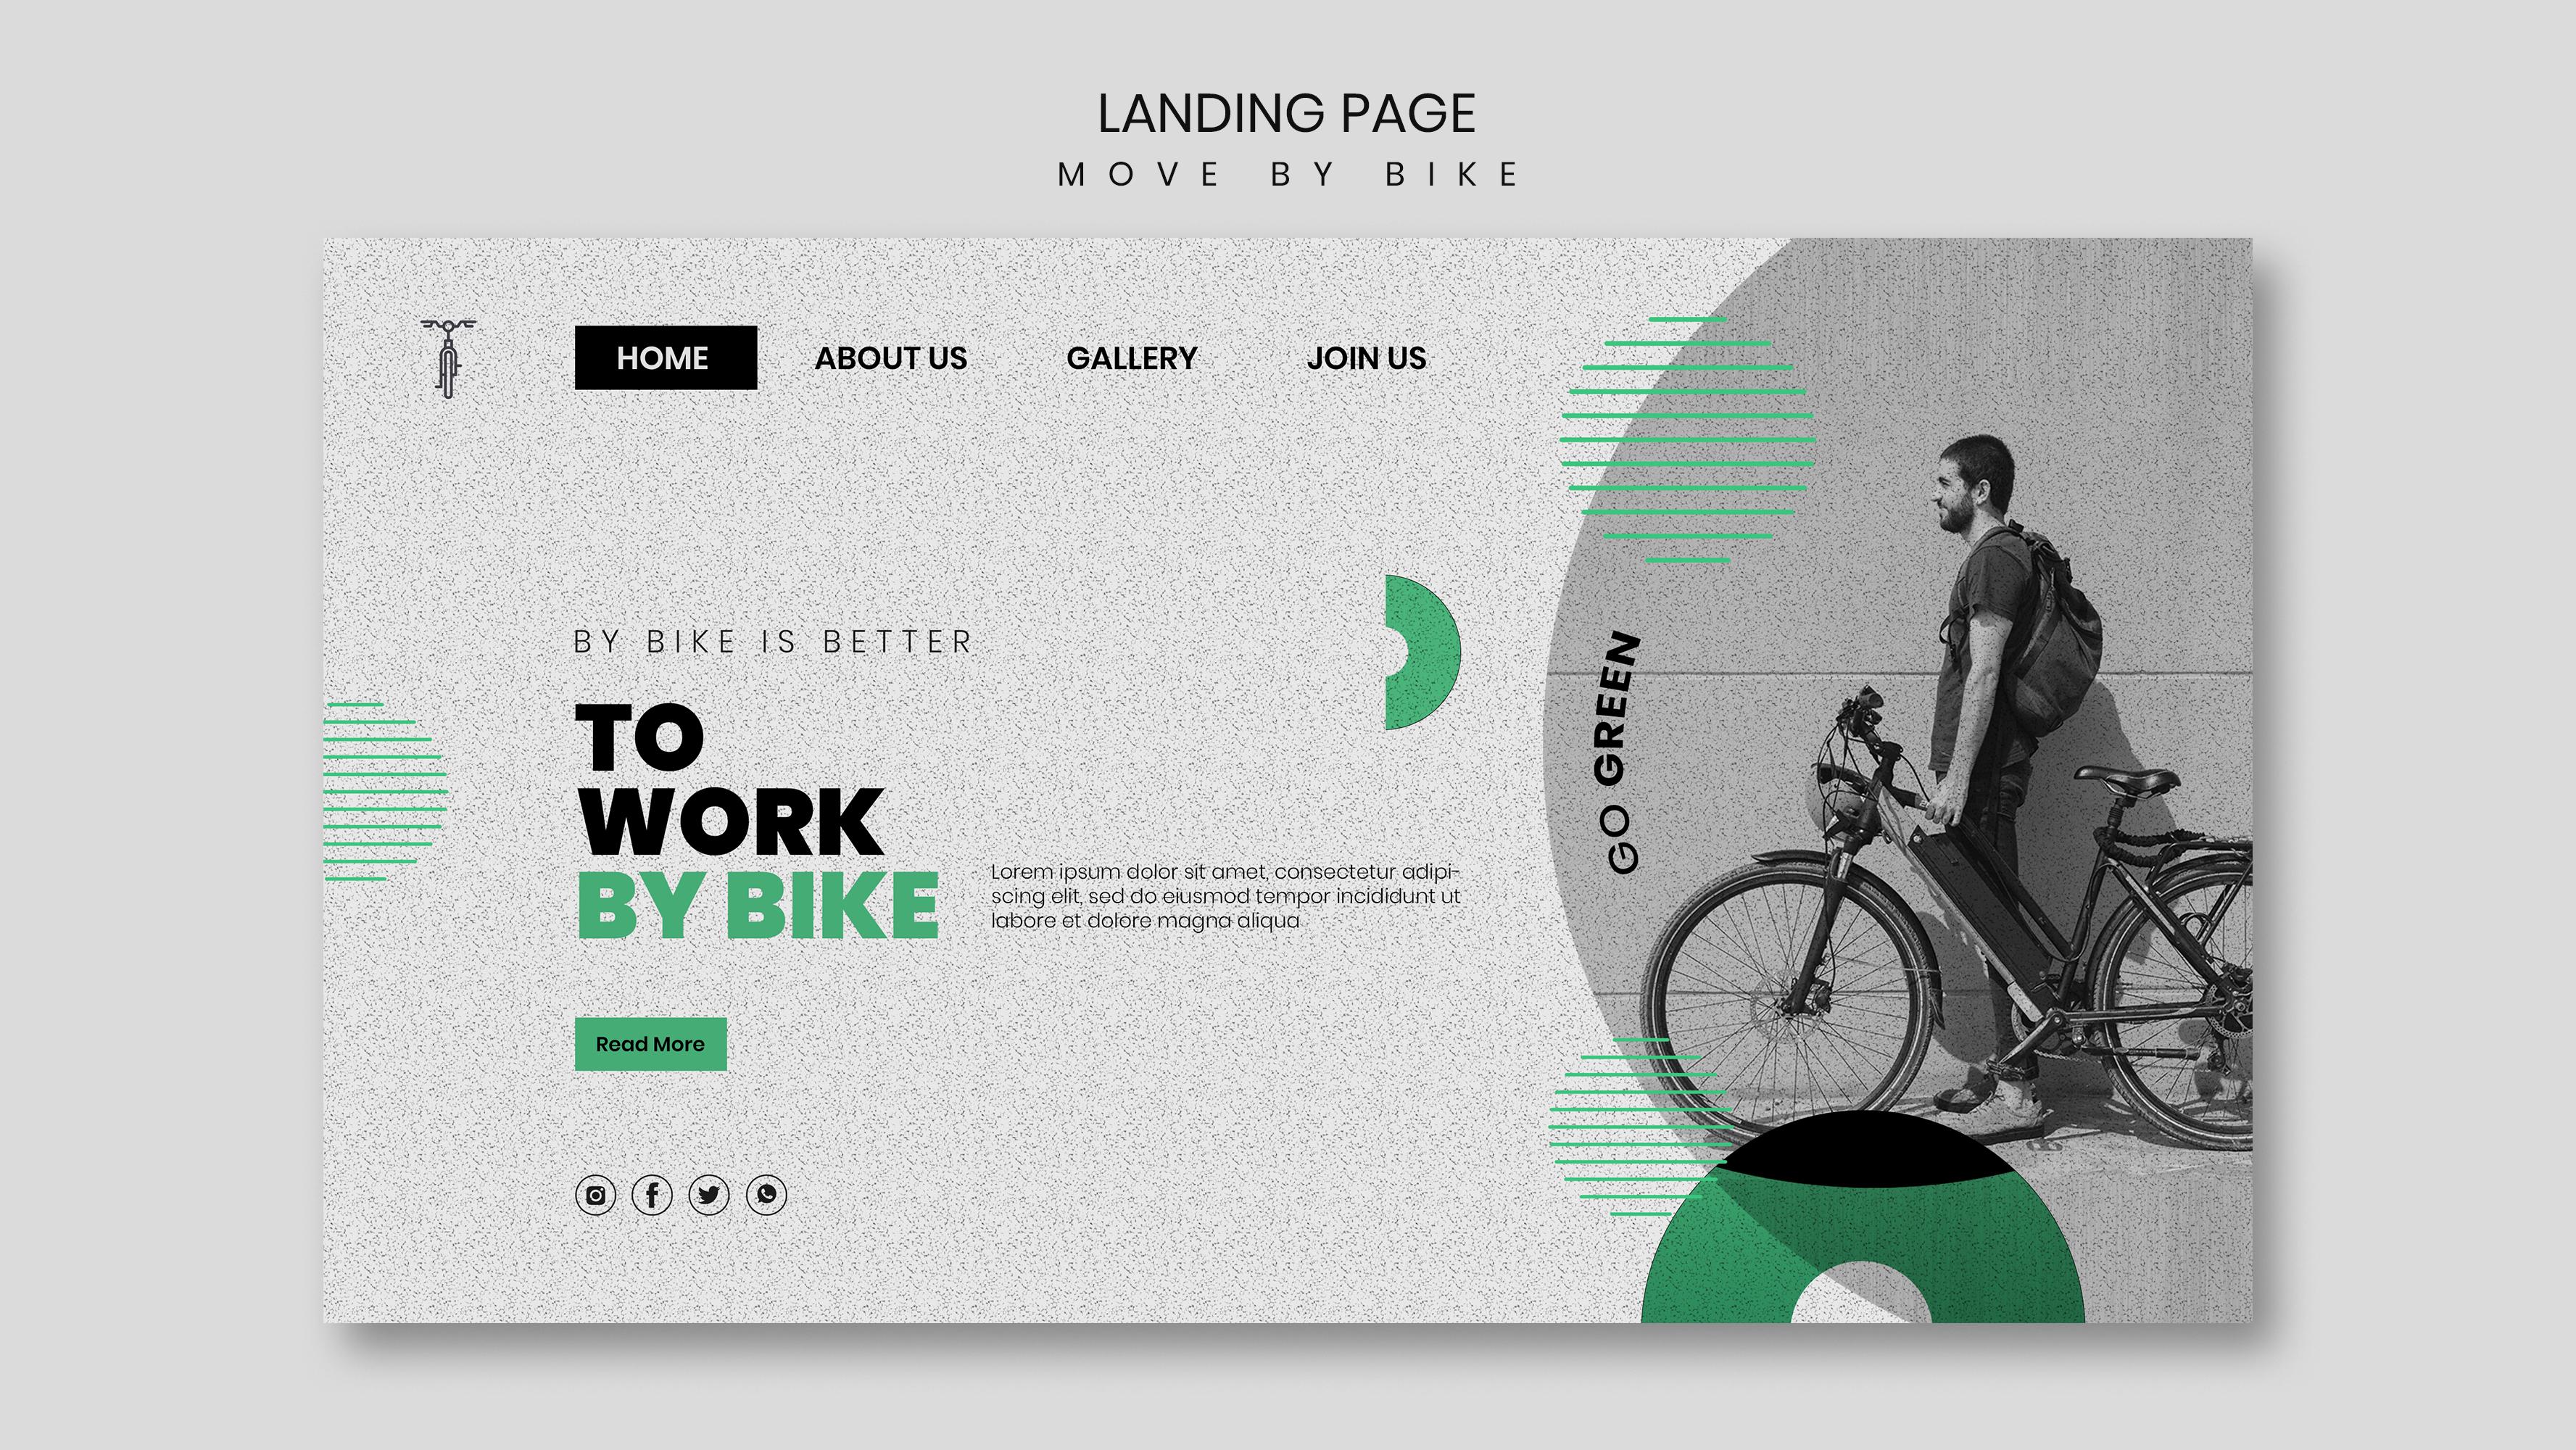 Psychological Principles of Design for Improved Landing Pages To Work By Bike